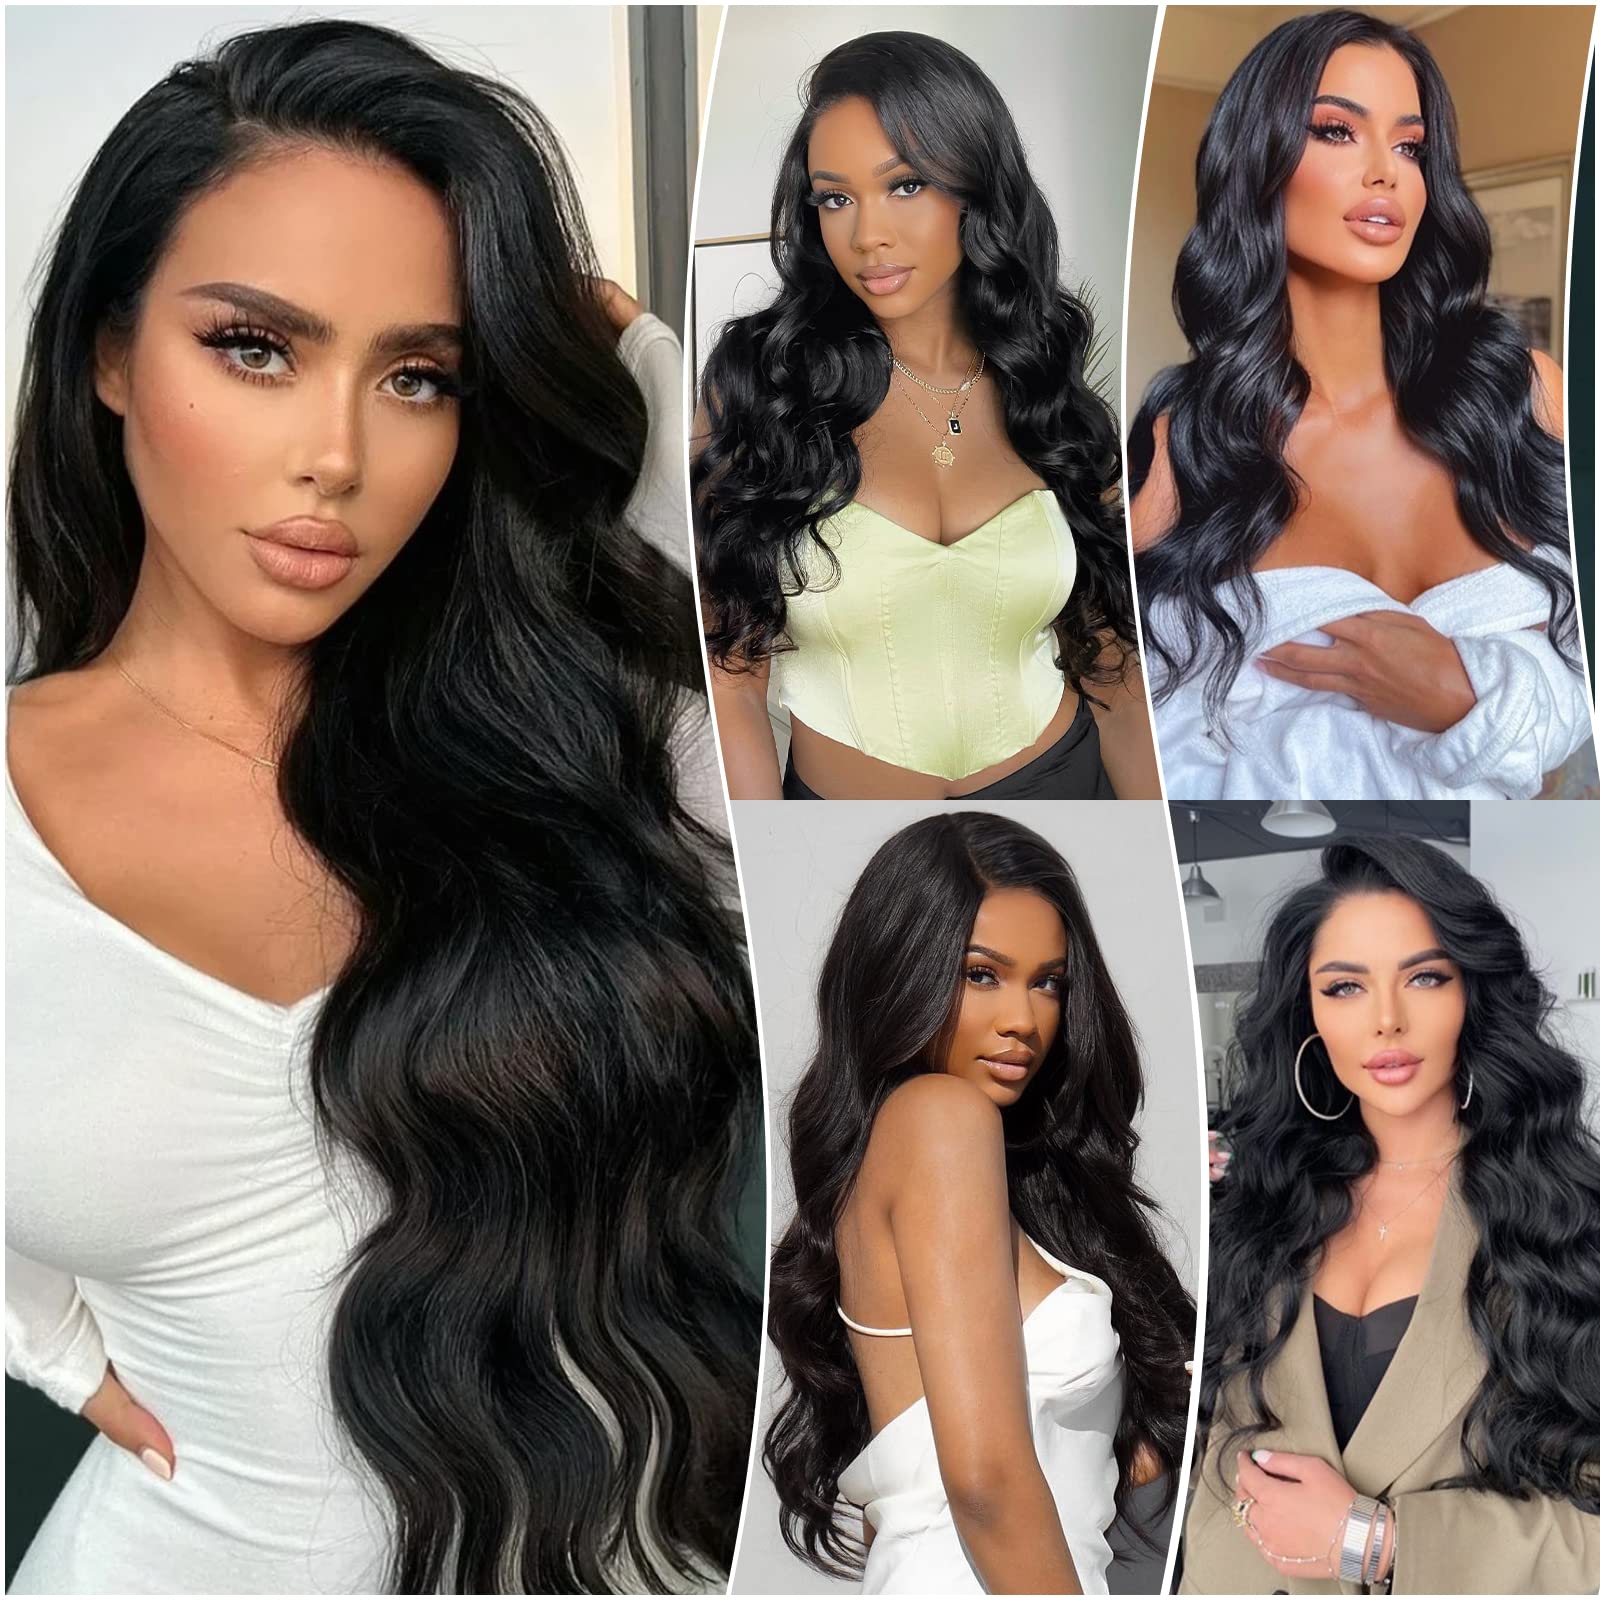 K'ryssma Black Synthetic Wigs for Black Women, Natural Looking Long Wavy Wigs Right Side Parting NONE Lace Front Black Wig Heat Resistant Fiber Wigs Hair Replacement Wig 24 inch